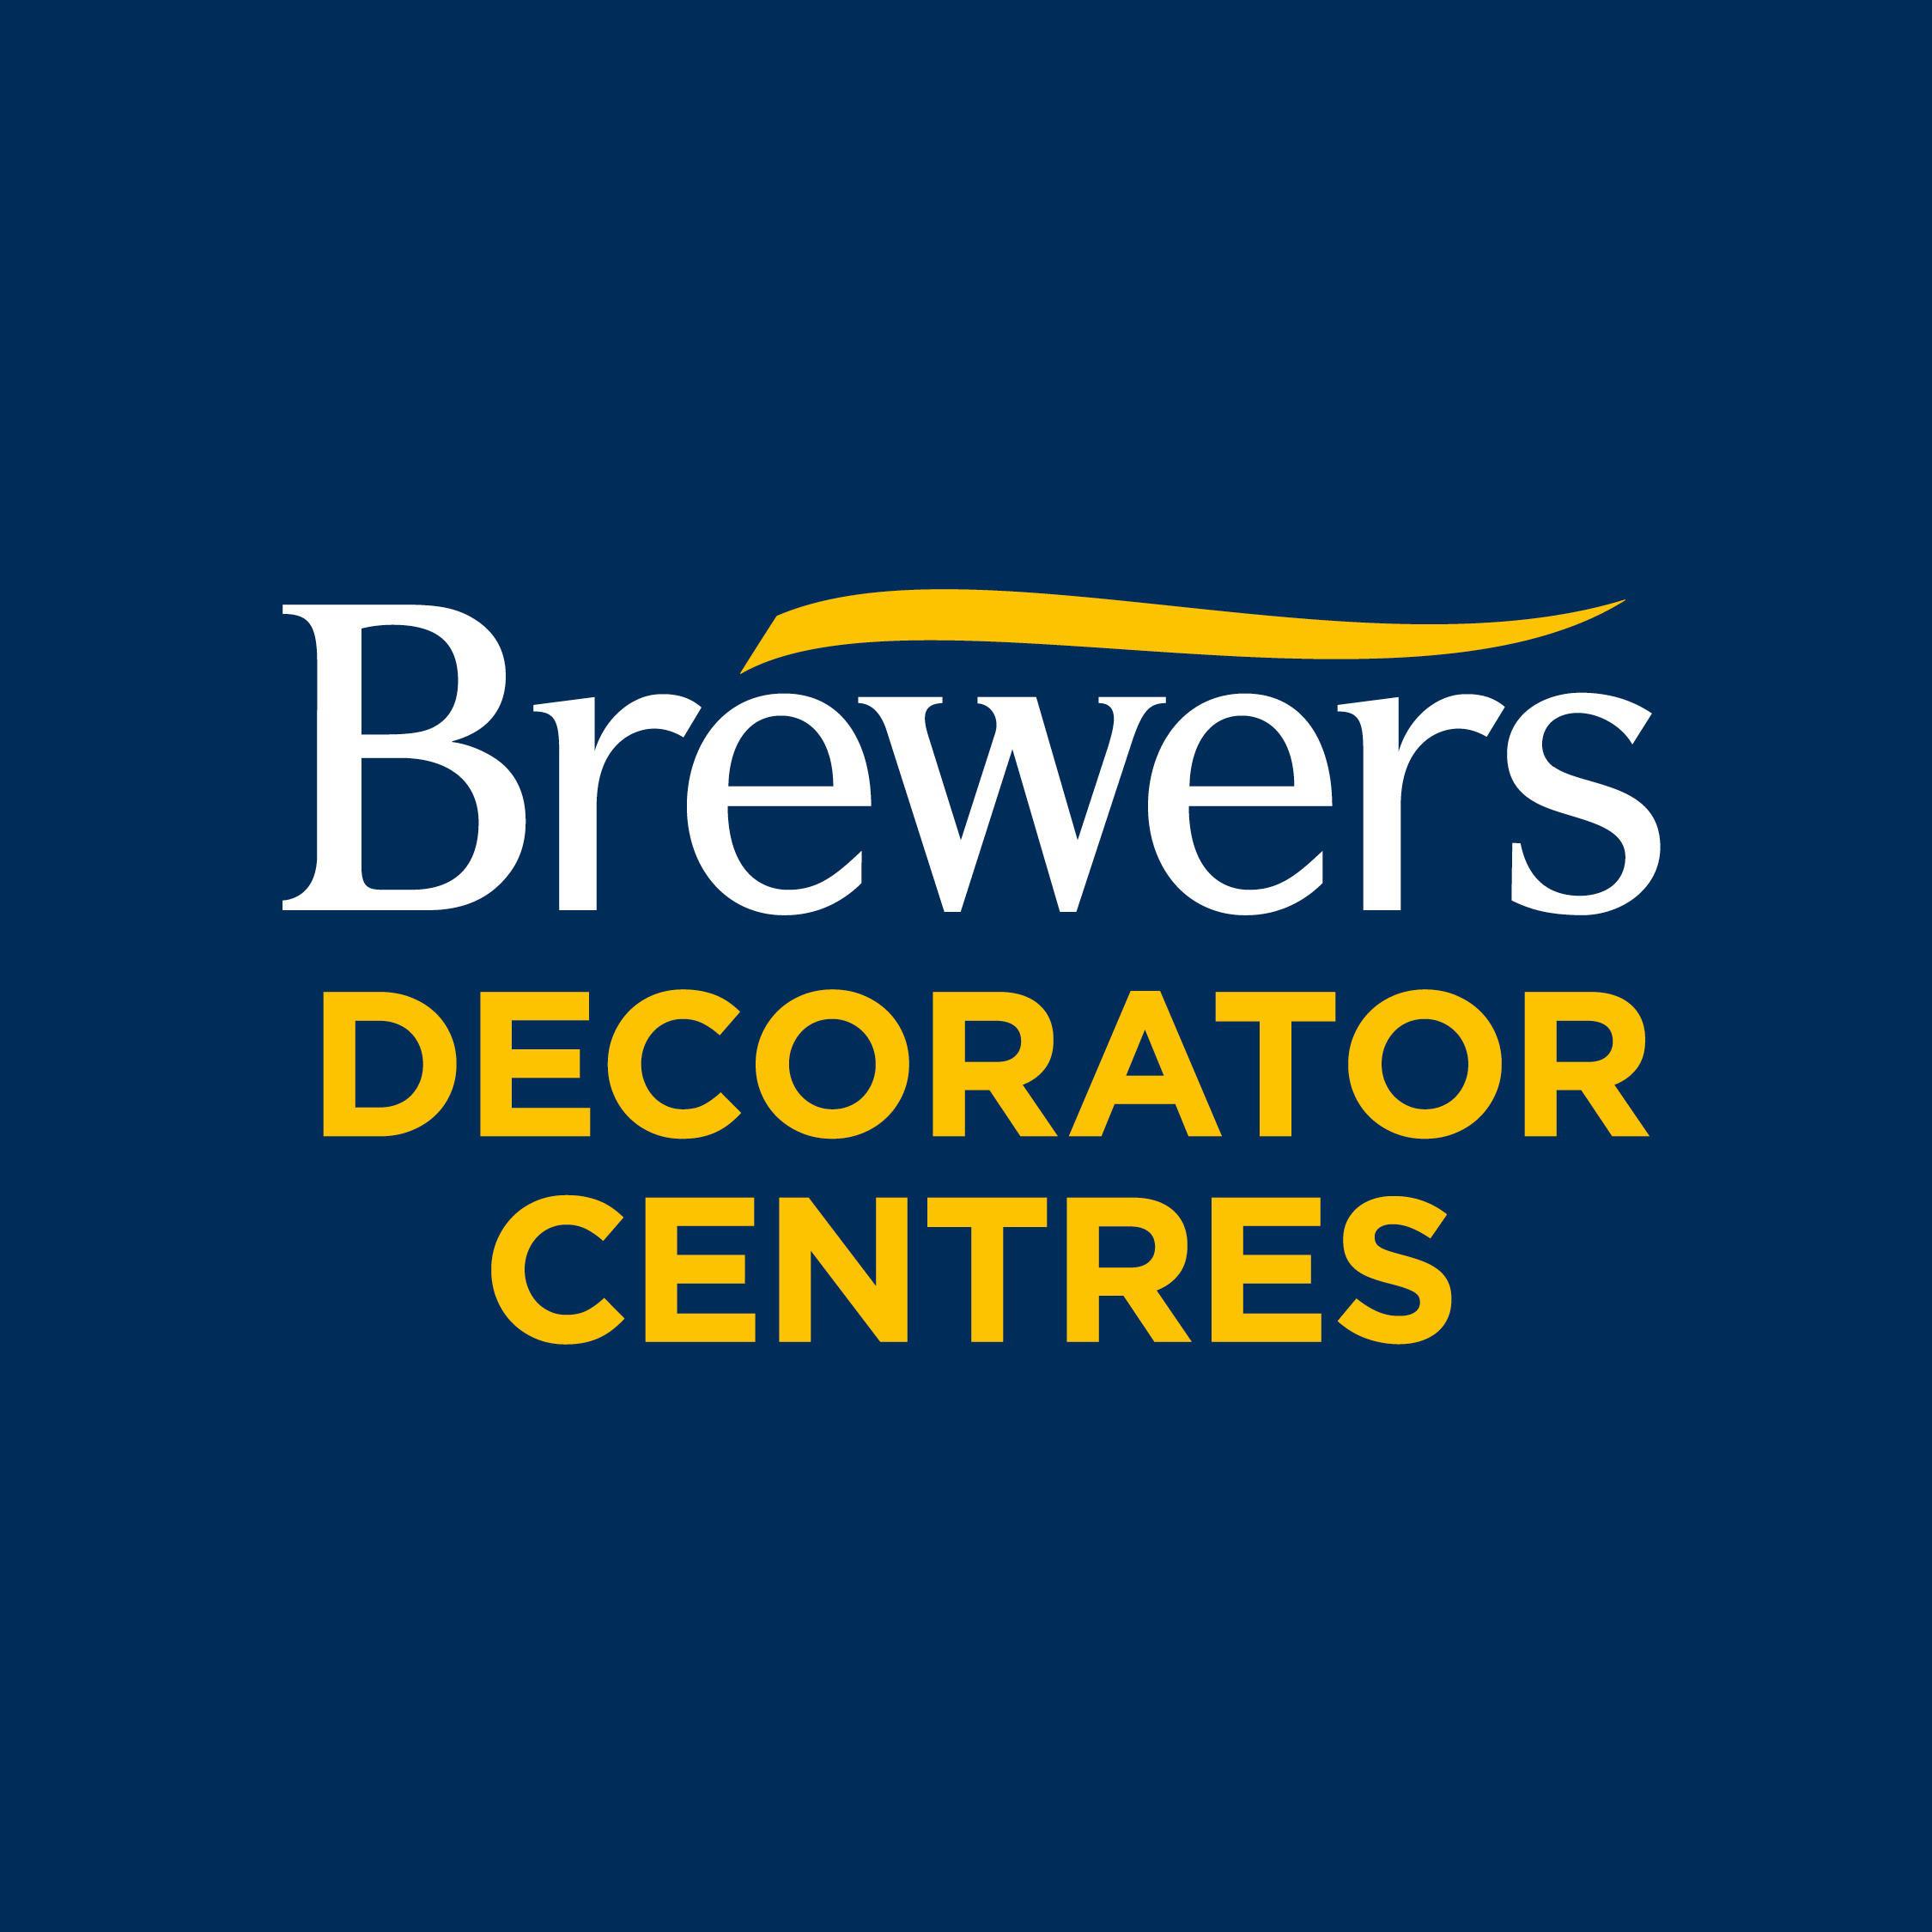 Brewers Decorator Centres - Doncaster, South Yorkshire DN2 4FS - 01302 972870 | ShowMeLocal.com